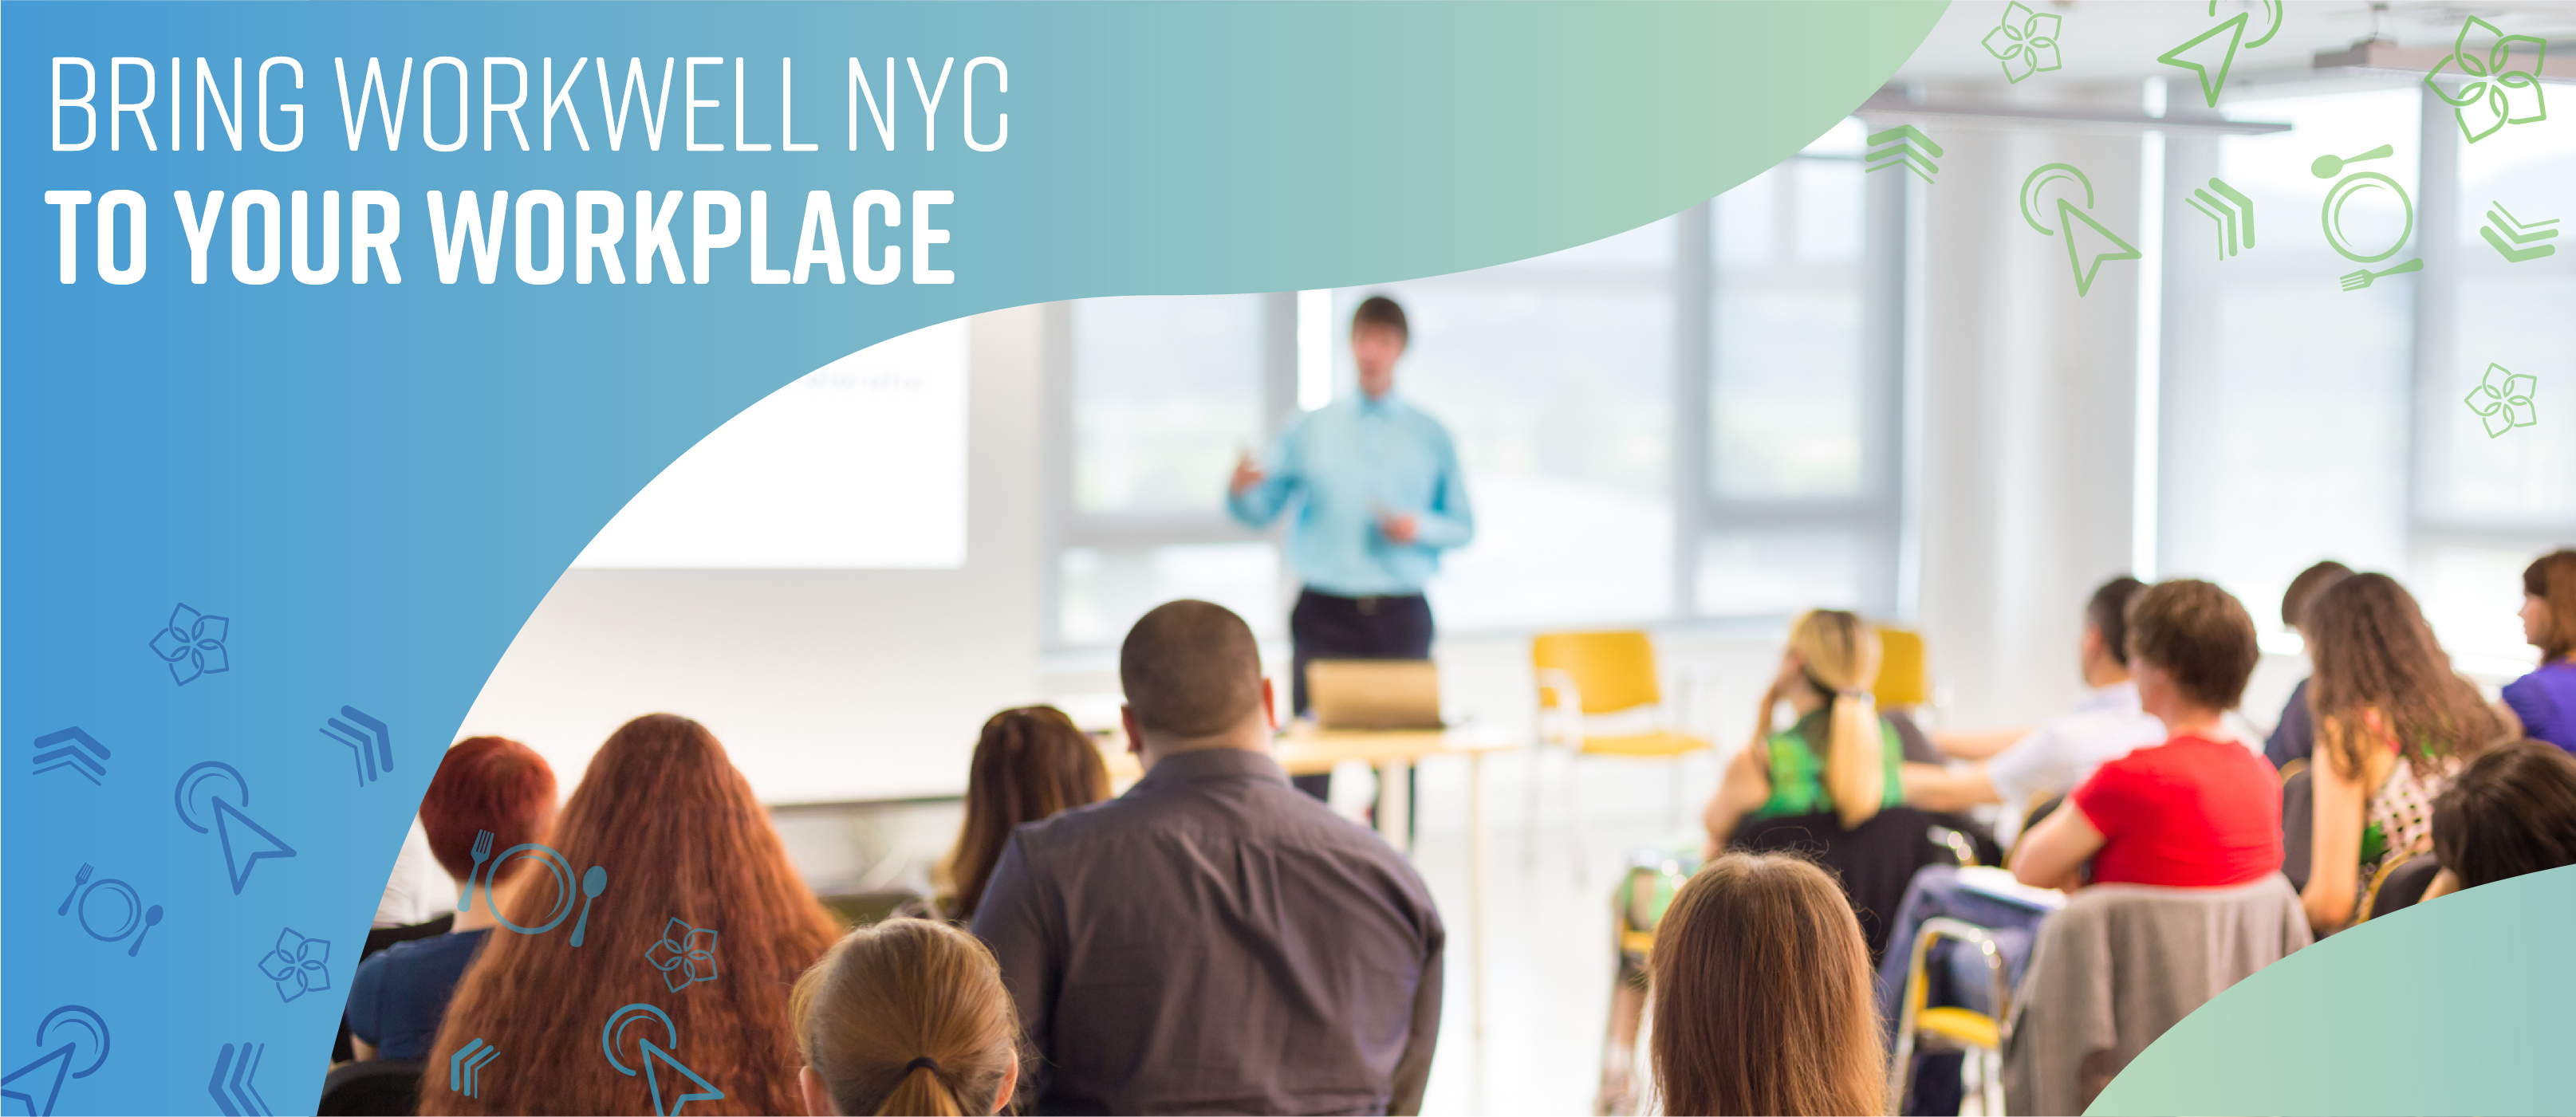 Bring Workwell NYC to Your Workplace